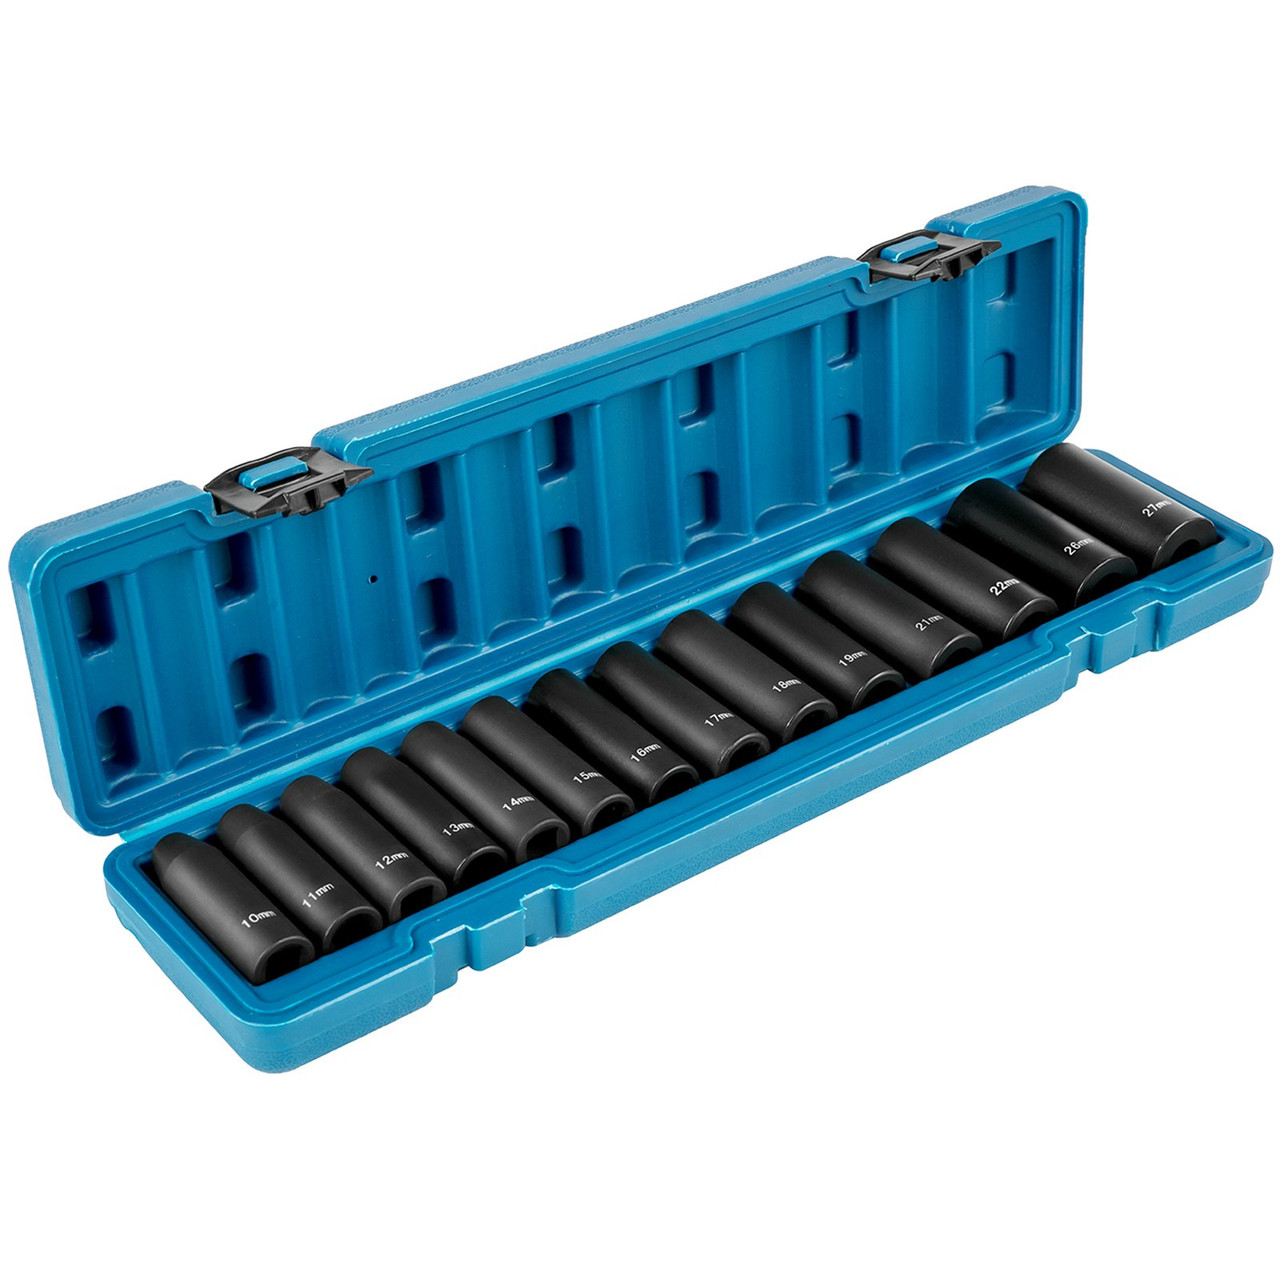 Impact Socket Set 1/2 Inch 14 Piece Impact Sockets, Deep Socket, 6-Point Sockets, Rugged Construction, Cr-V, 1/2 Inch Drive Socket Set Impact Metric 10mm - 27mm, with a Storage Cage